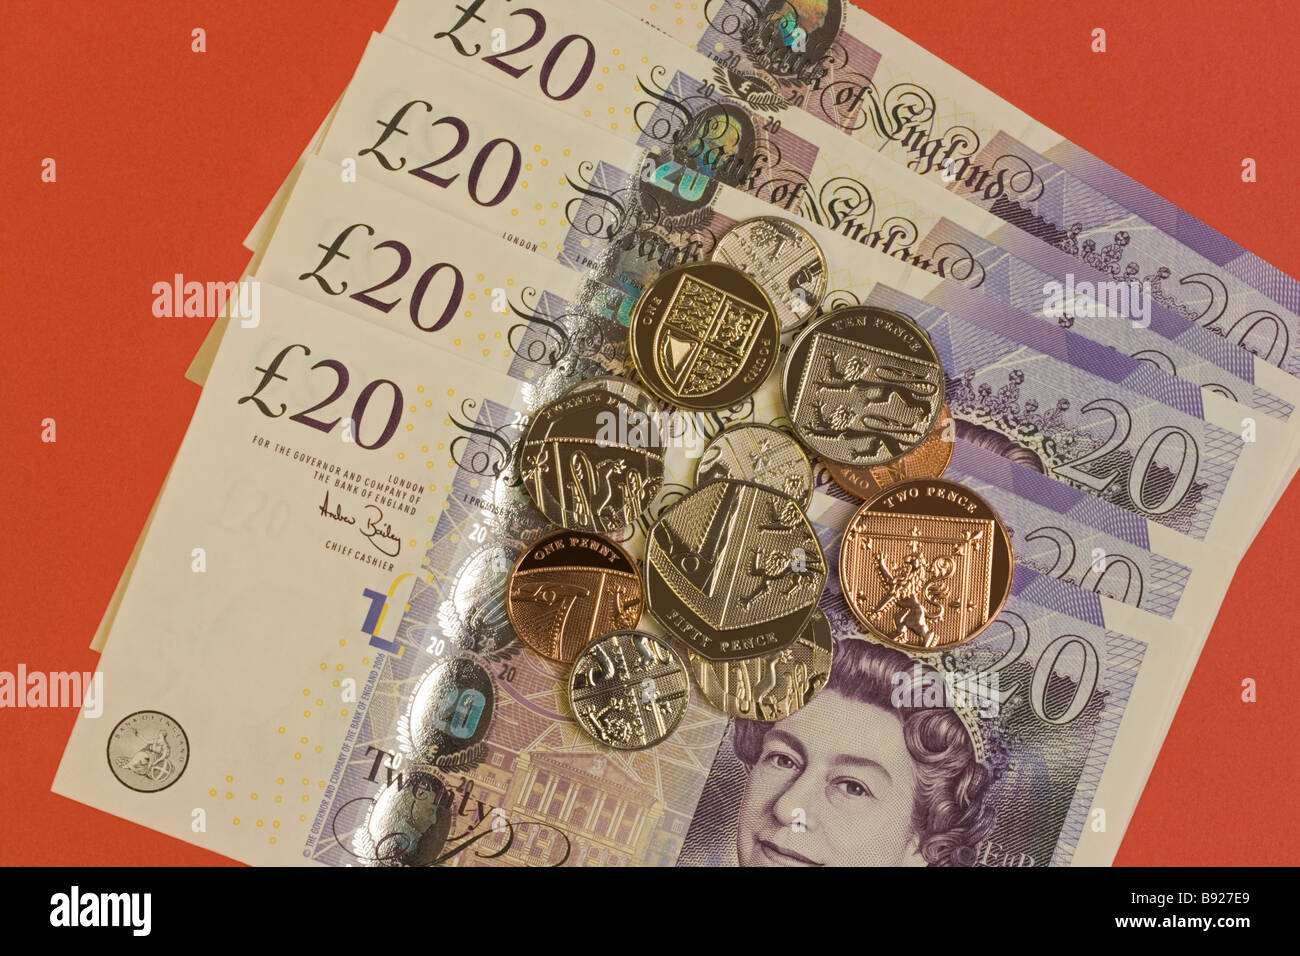 Twenty pound notes with sterling coins Stock Photo